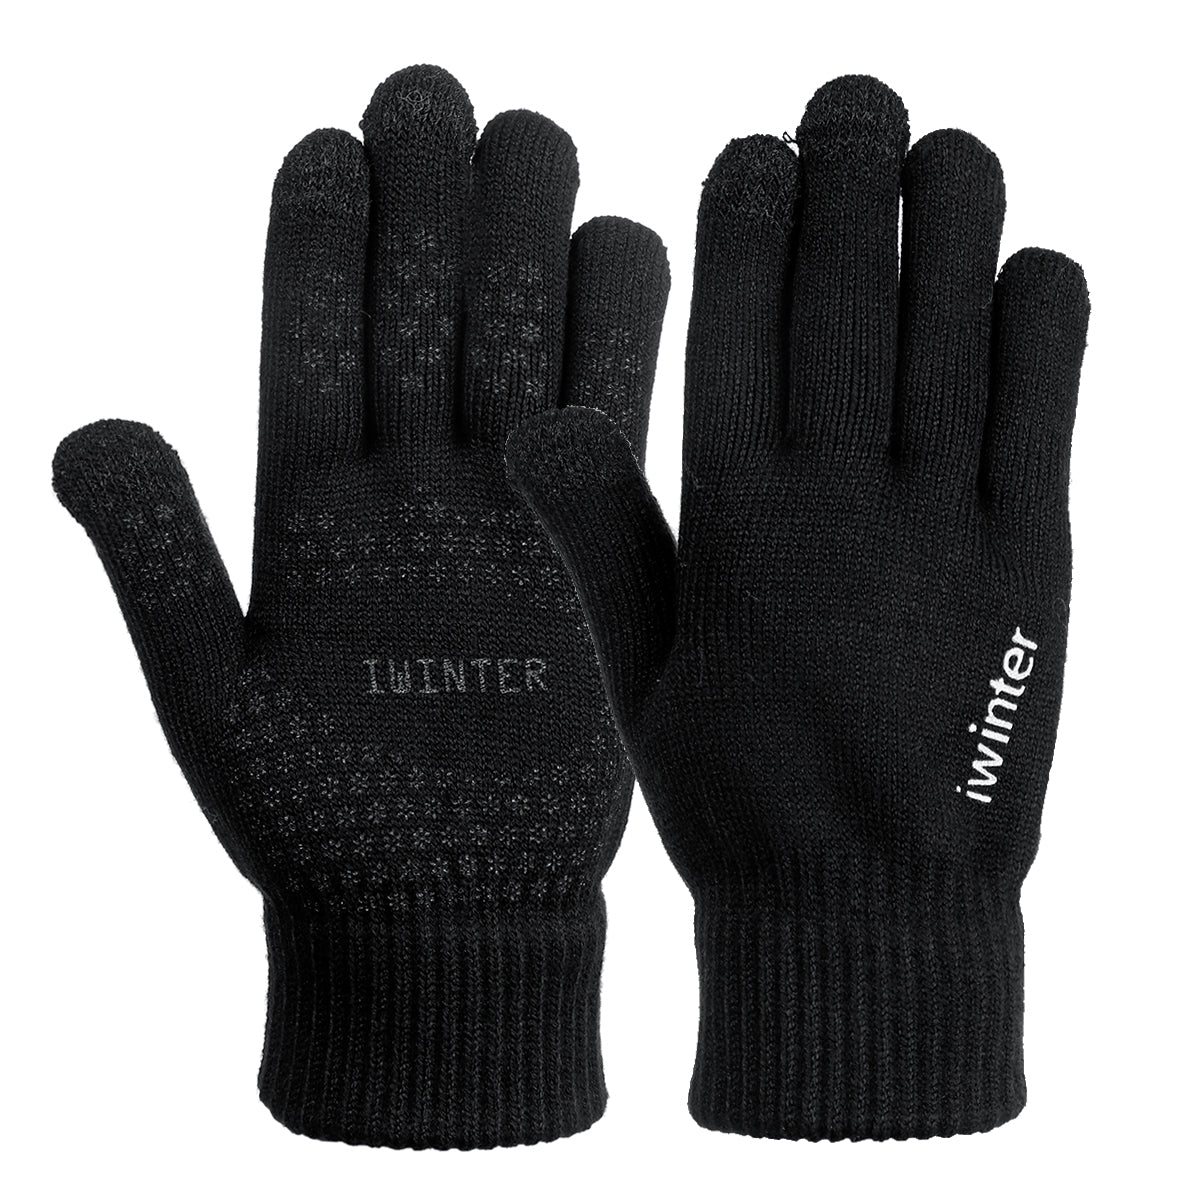 Black Knitted Touch Screen Outdoor Gloves Motorcycle Winter Warm Windproof Fleece Lined Thermal Non-slip